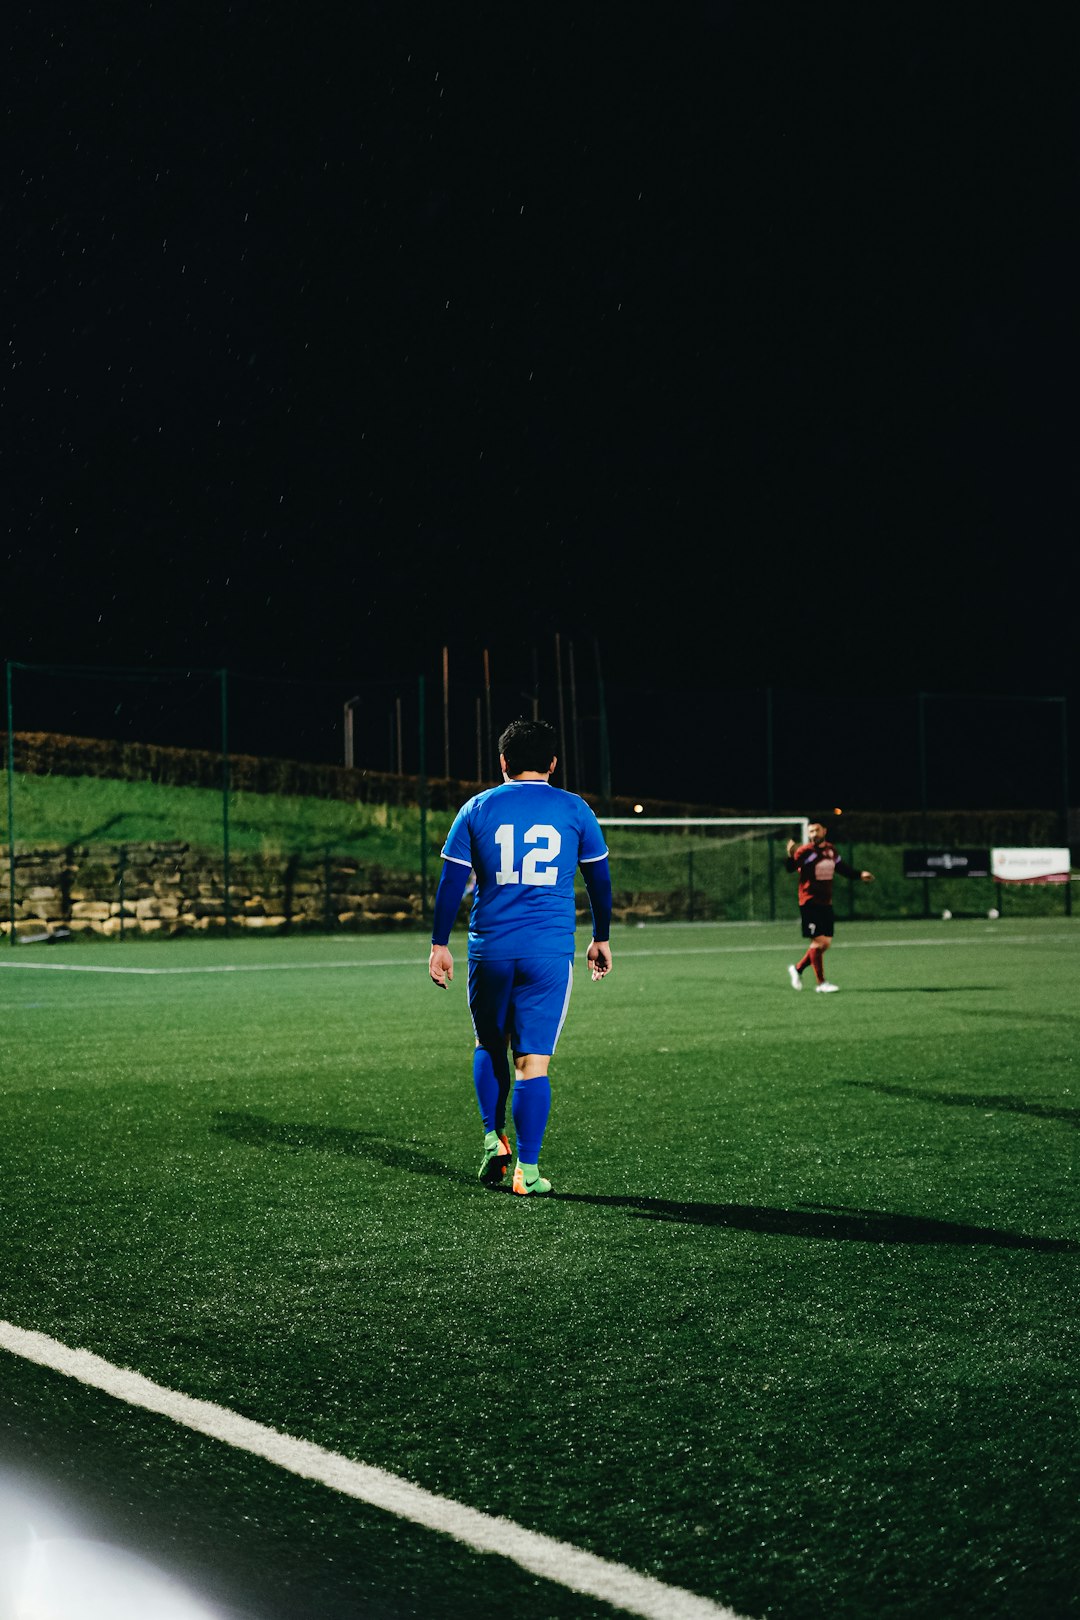 man in blue jersey shirt and black shorts standing on green grass field during nighttime